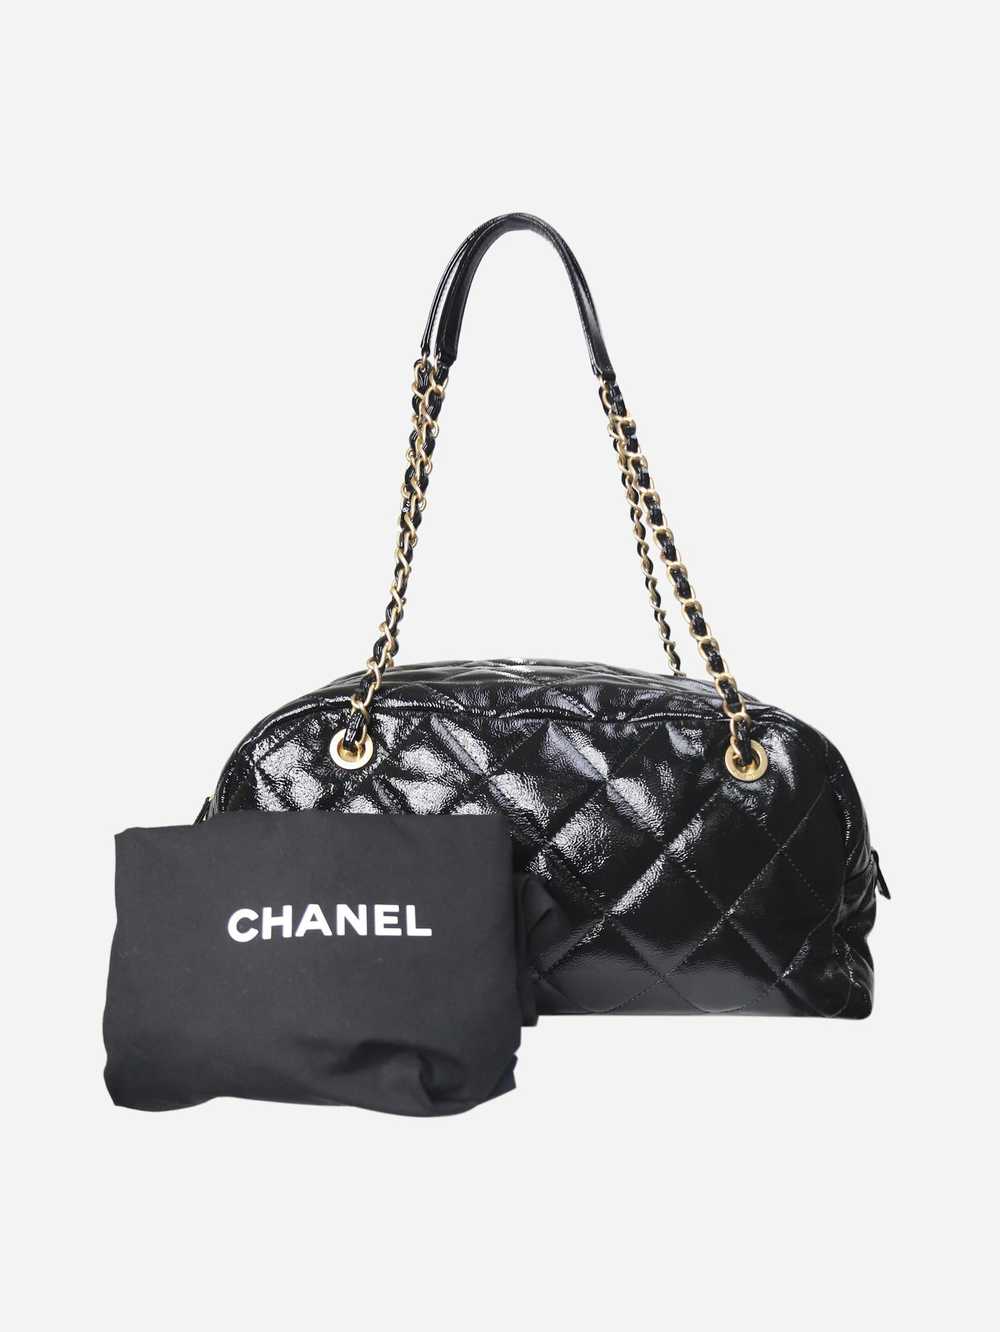 Chanel Black 2020 patent leather bowling bag - image 6